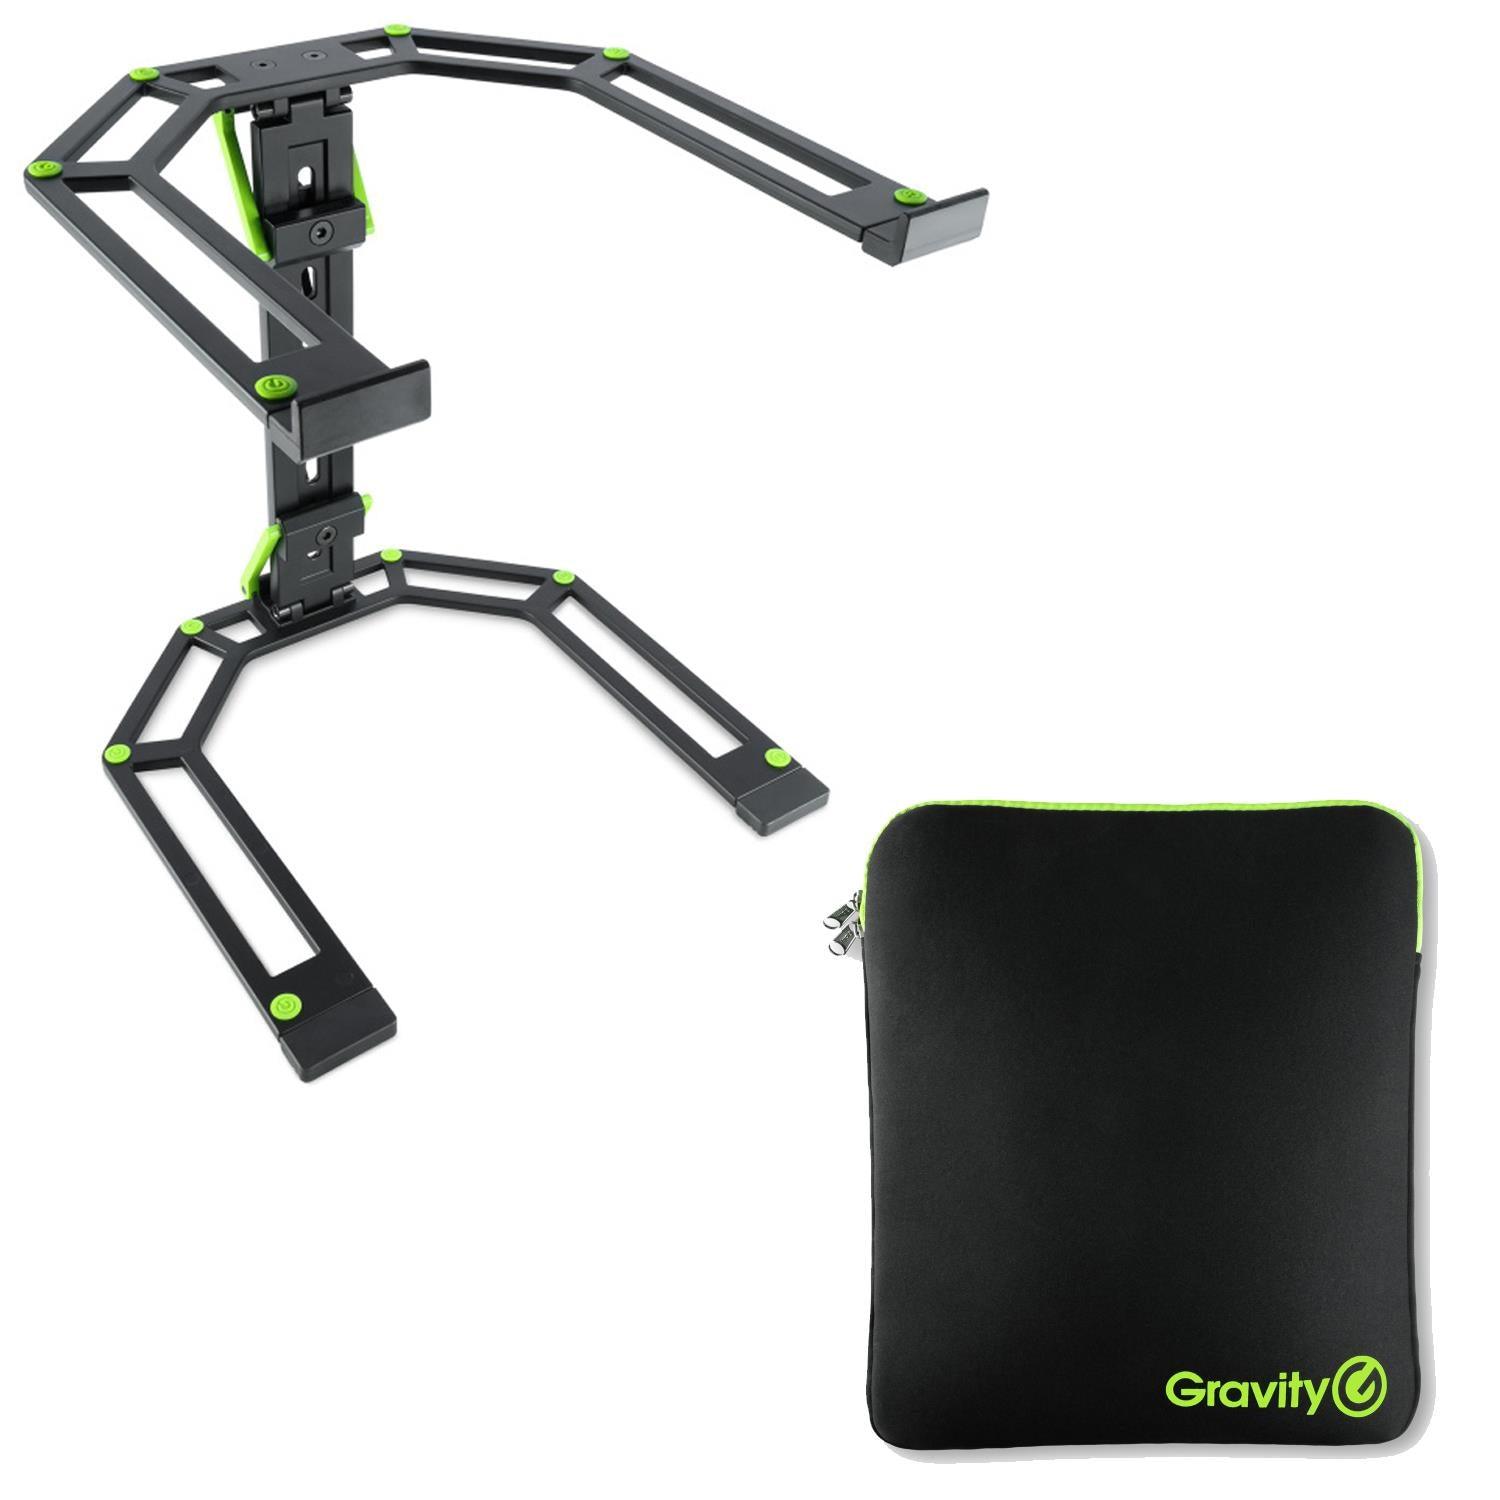 Gravity LTS 01 B SET 1 Adjustable Stand for Laptops and Controllers With Bag - DY Pro Audio